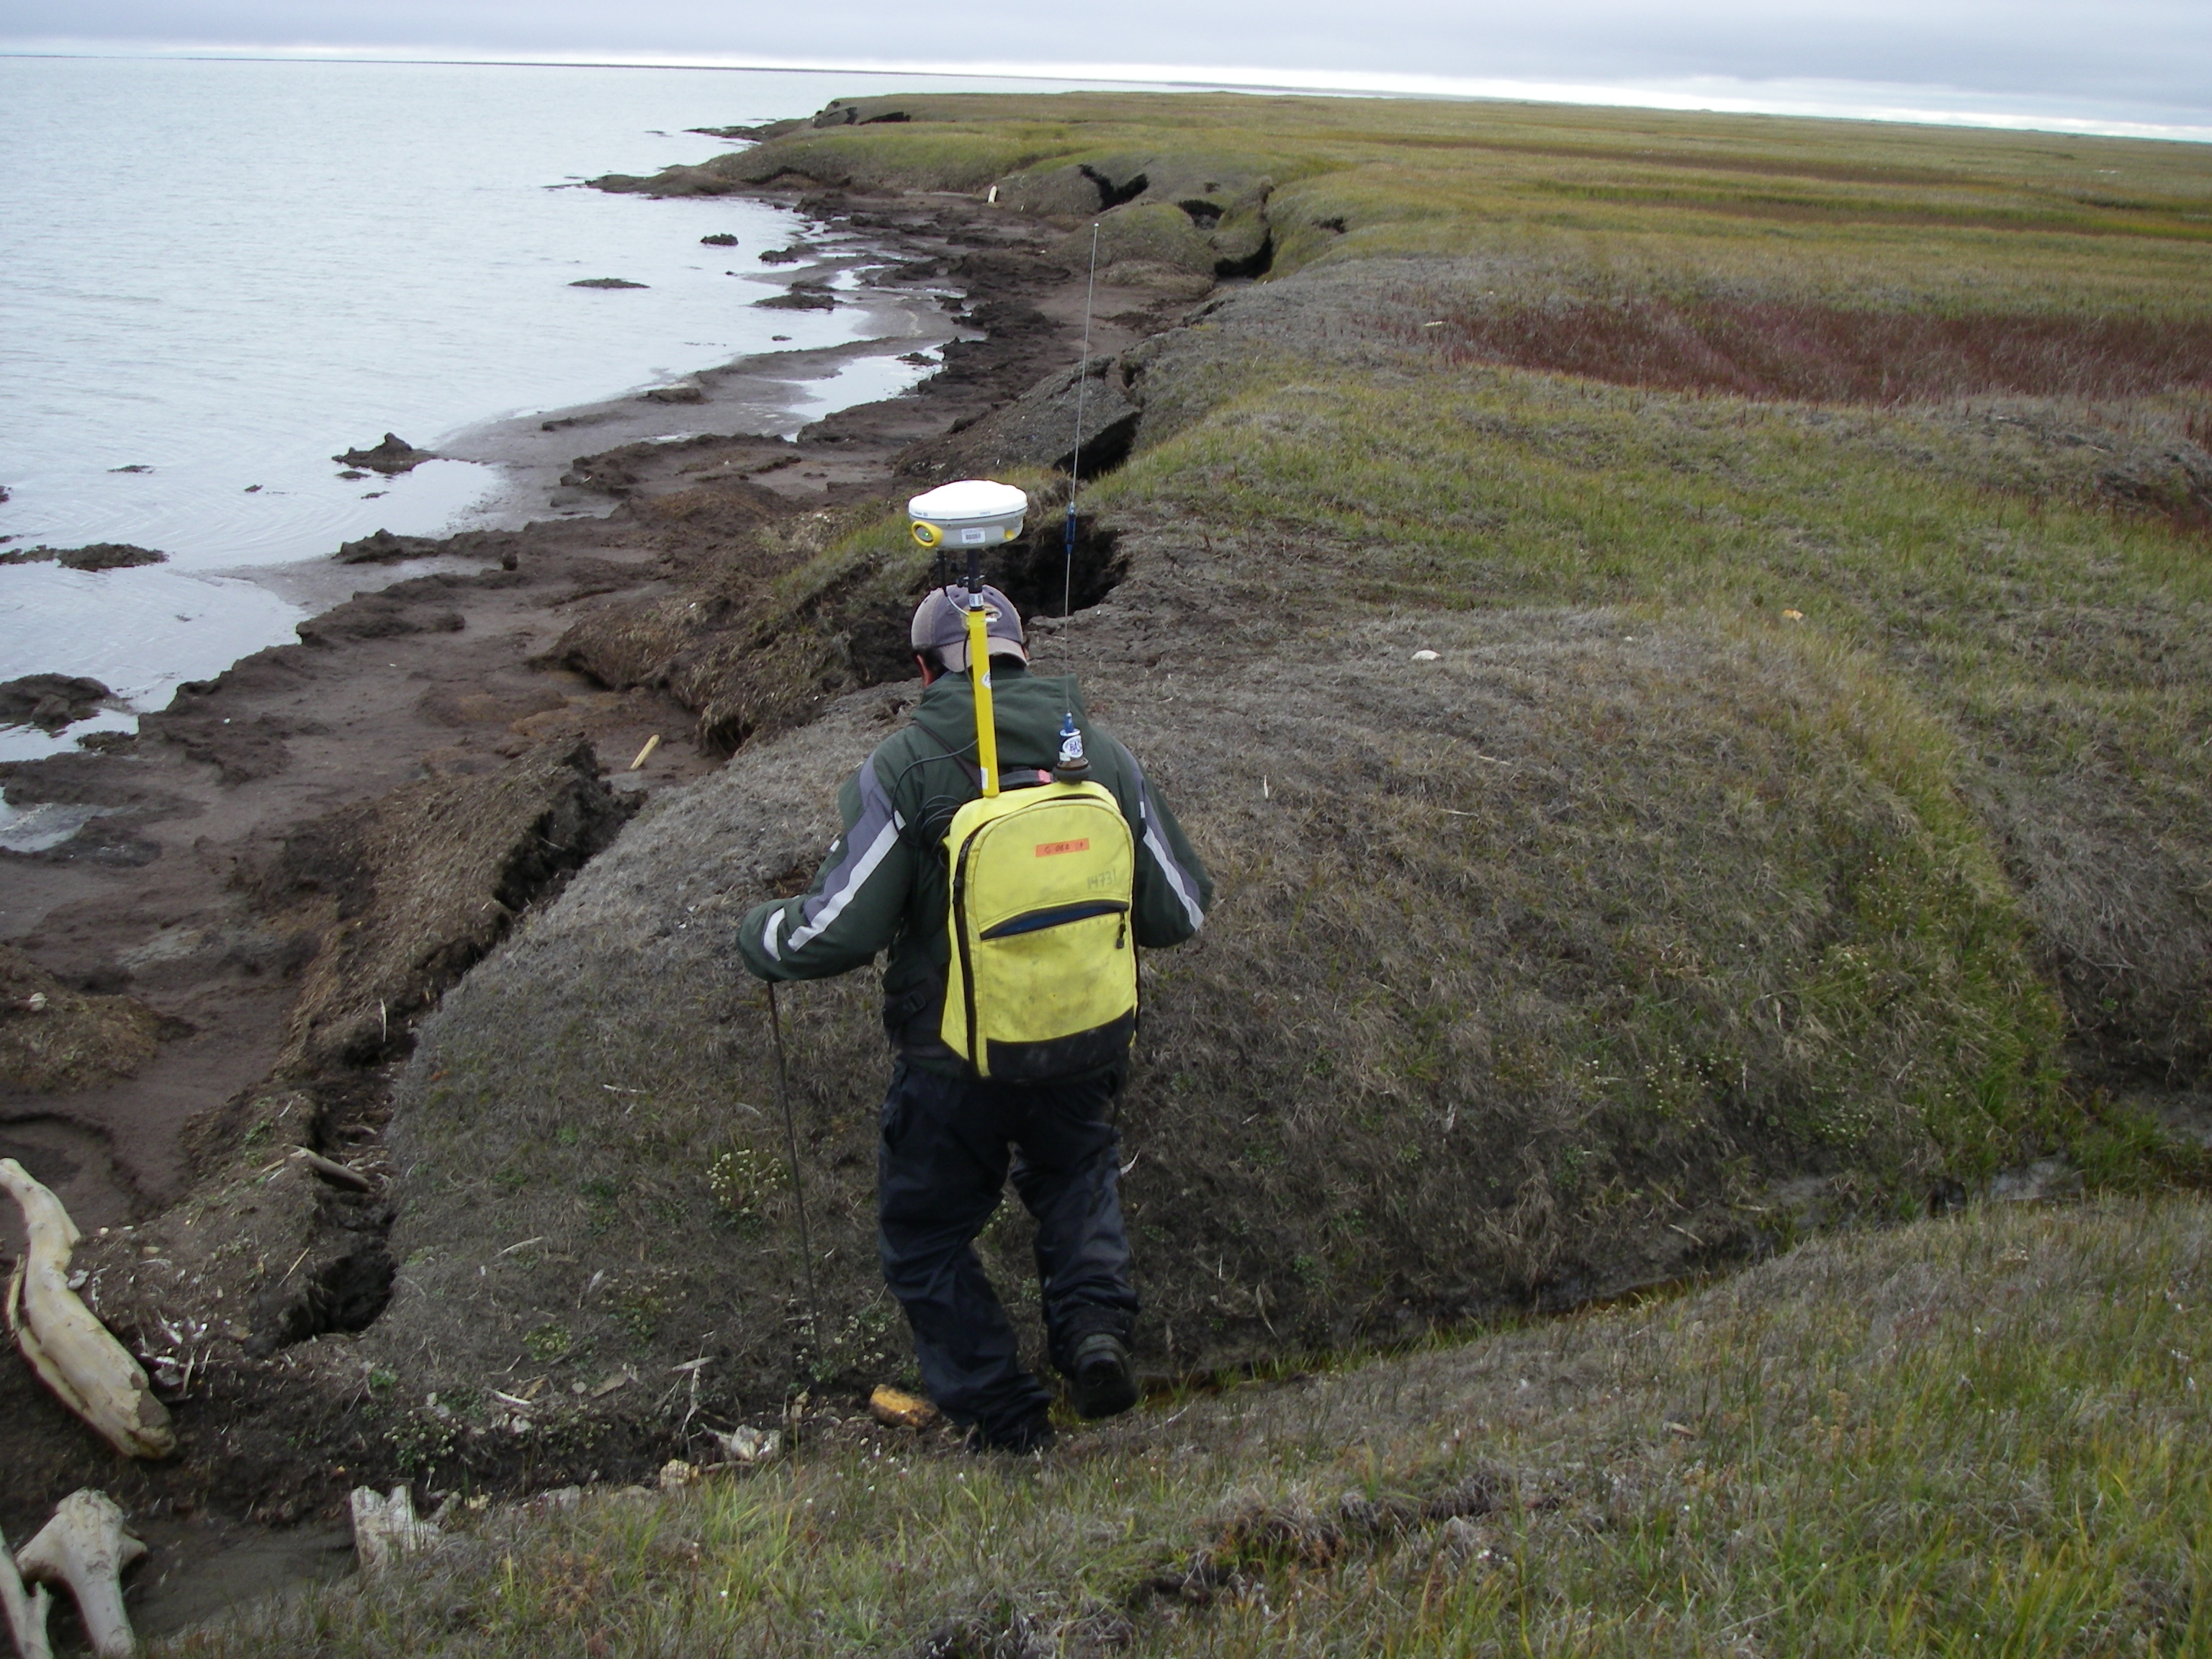 Image of a person walking along an irregular and eroded coastline with a backpack equipped with some technical instrumentation.